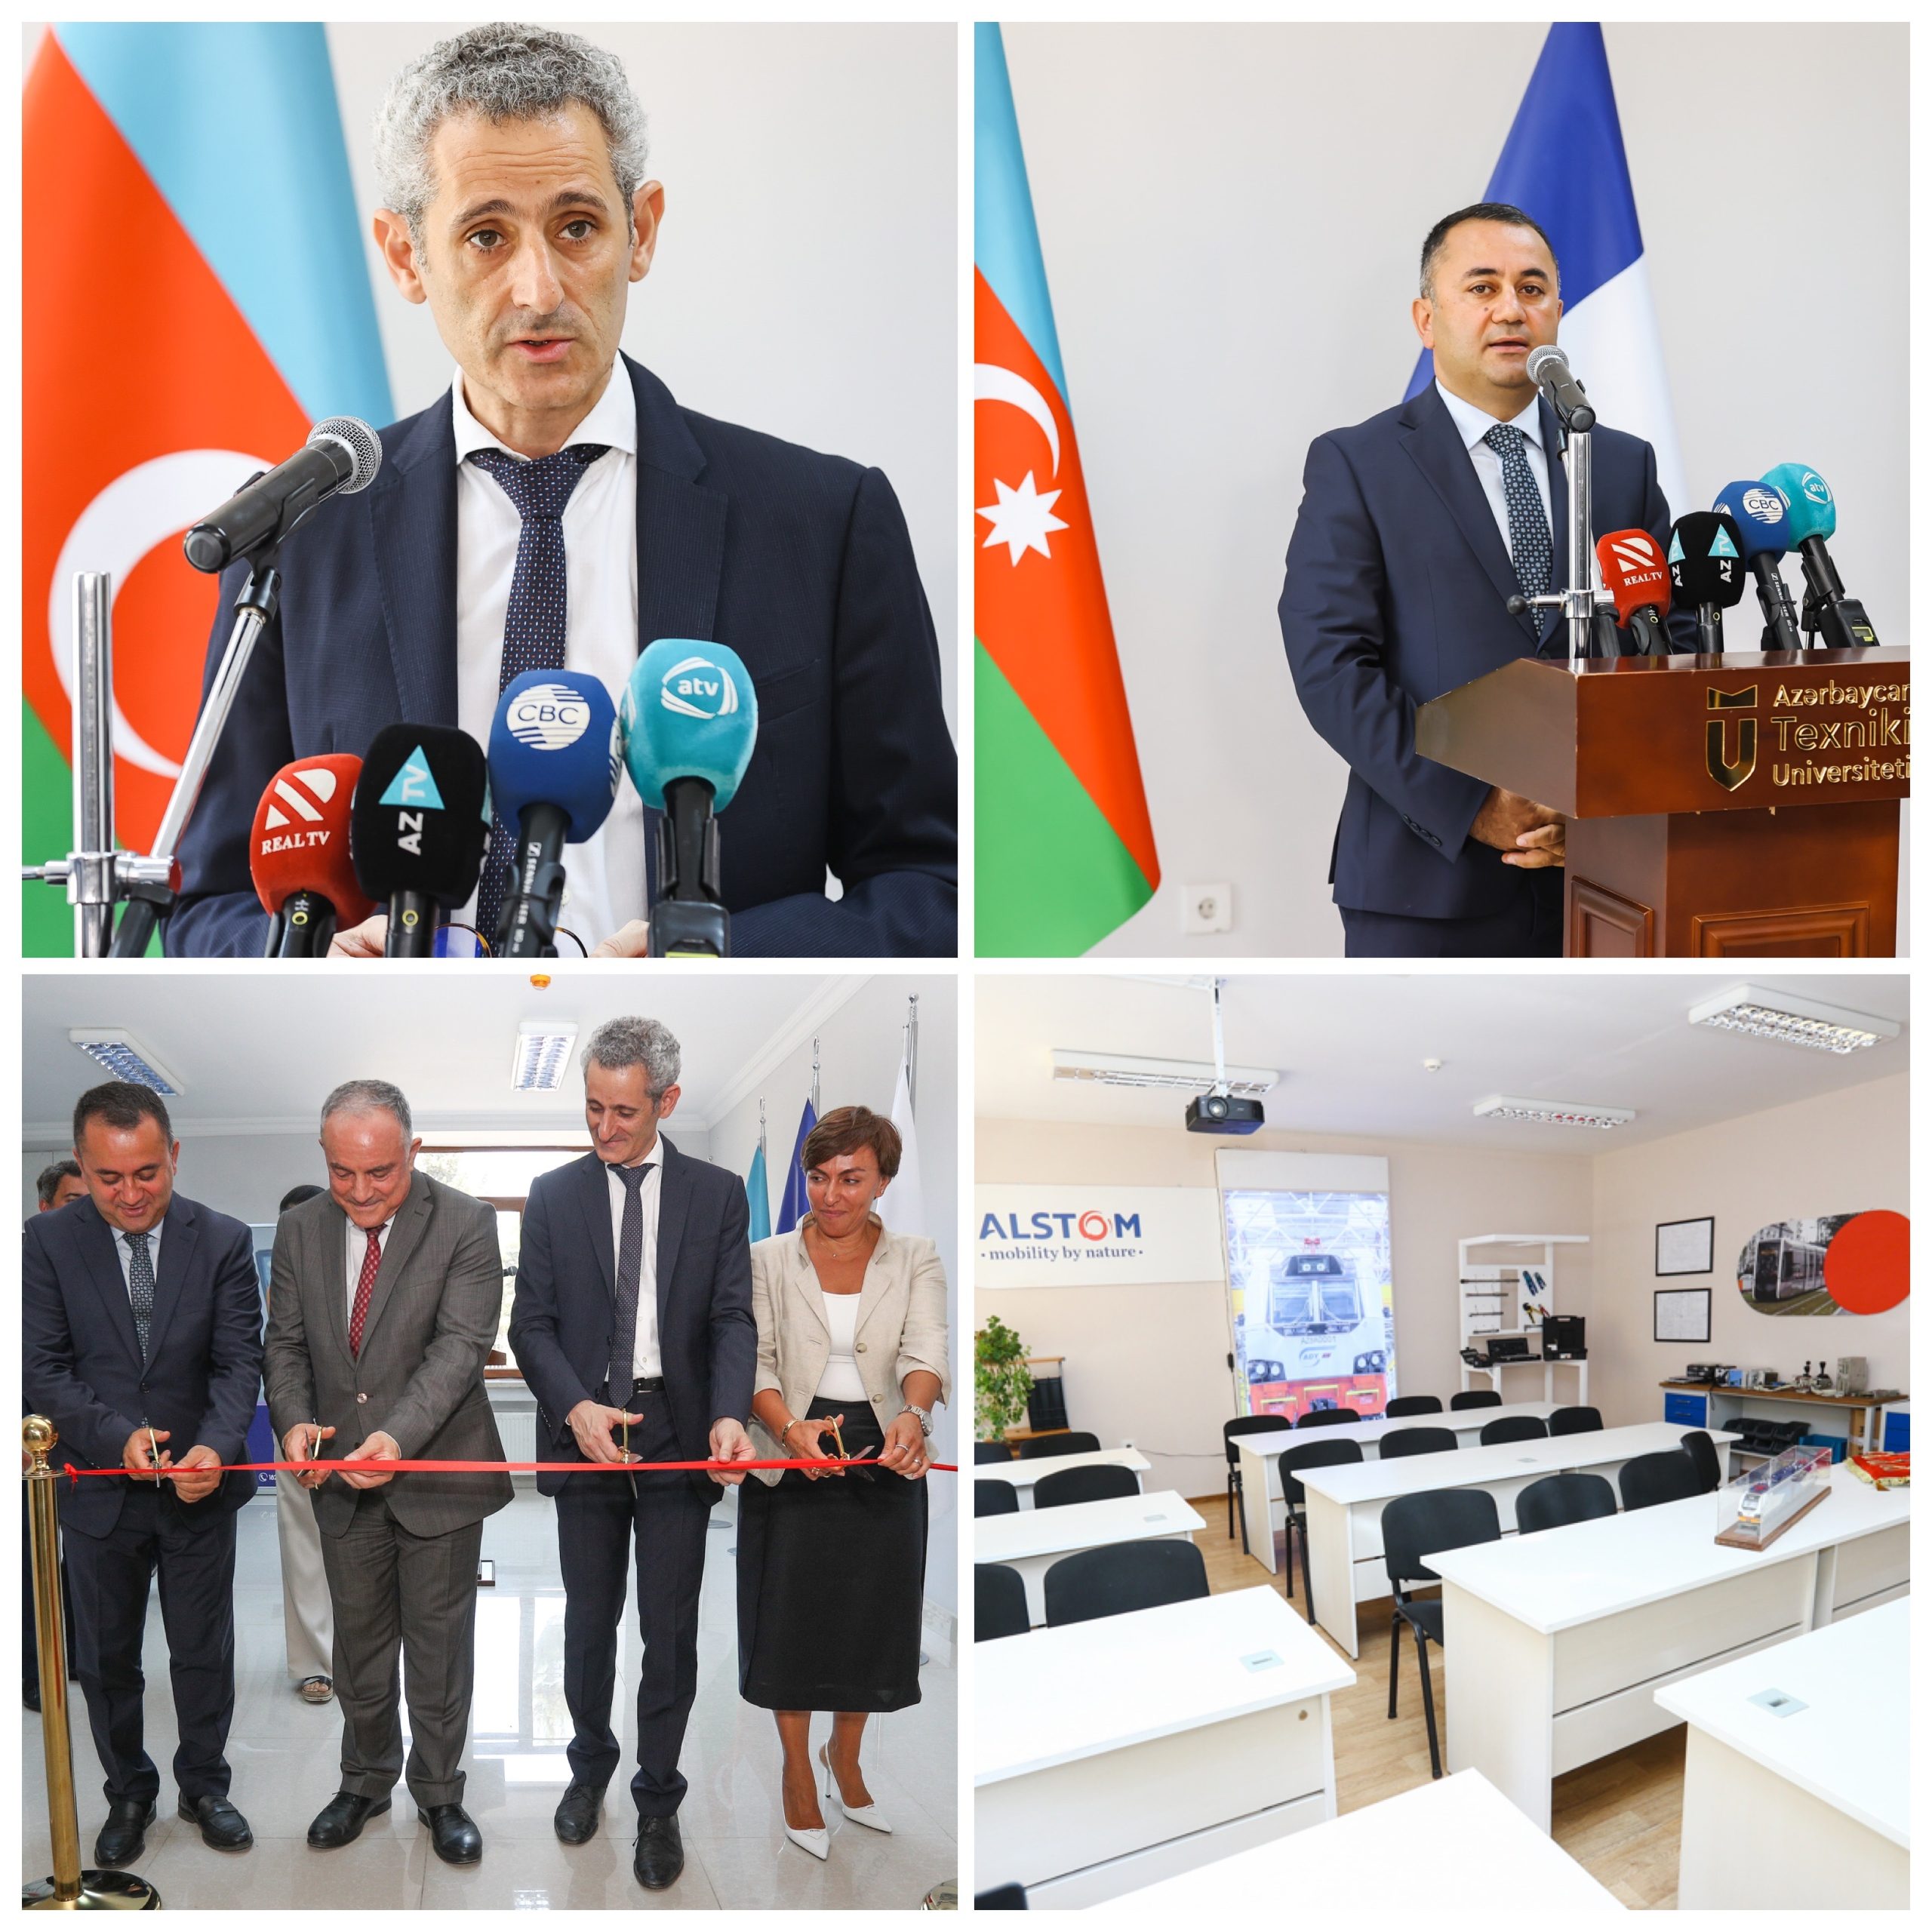 On 19 July, AFchamber member company Alstom Transport launched the Alstom Railway Training Center at Azerbaijan Technical University.